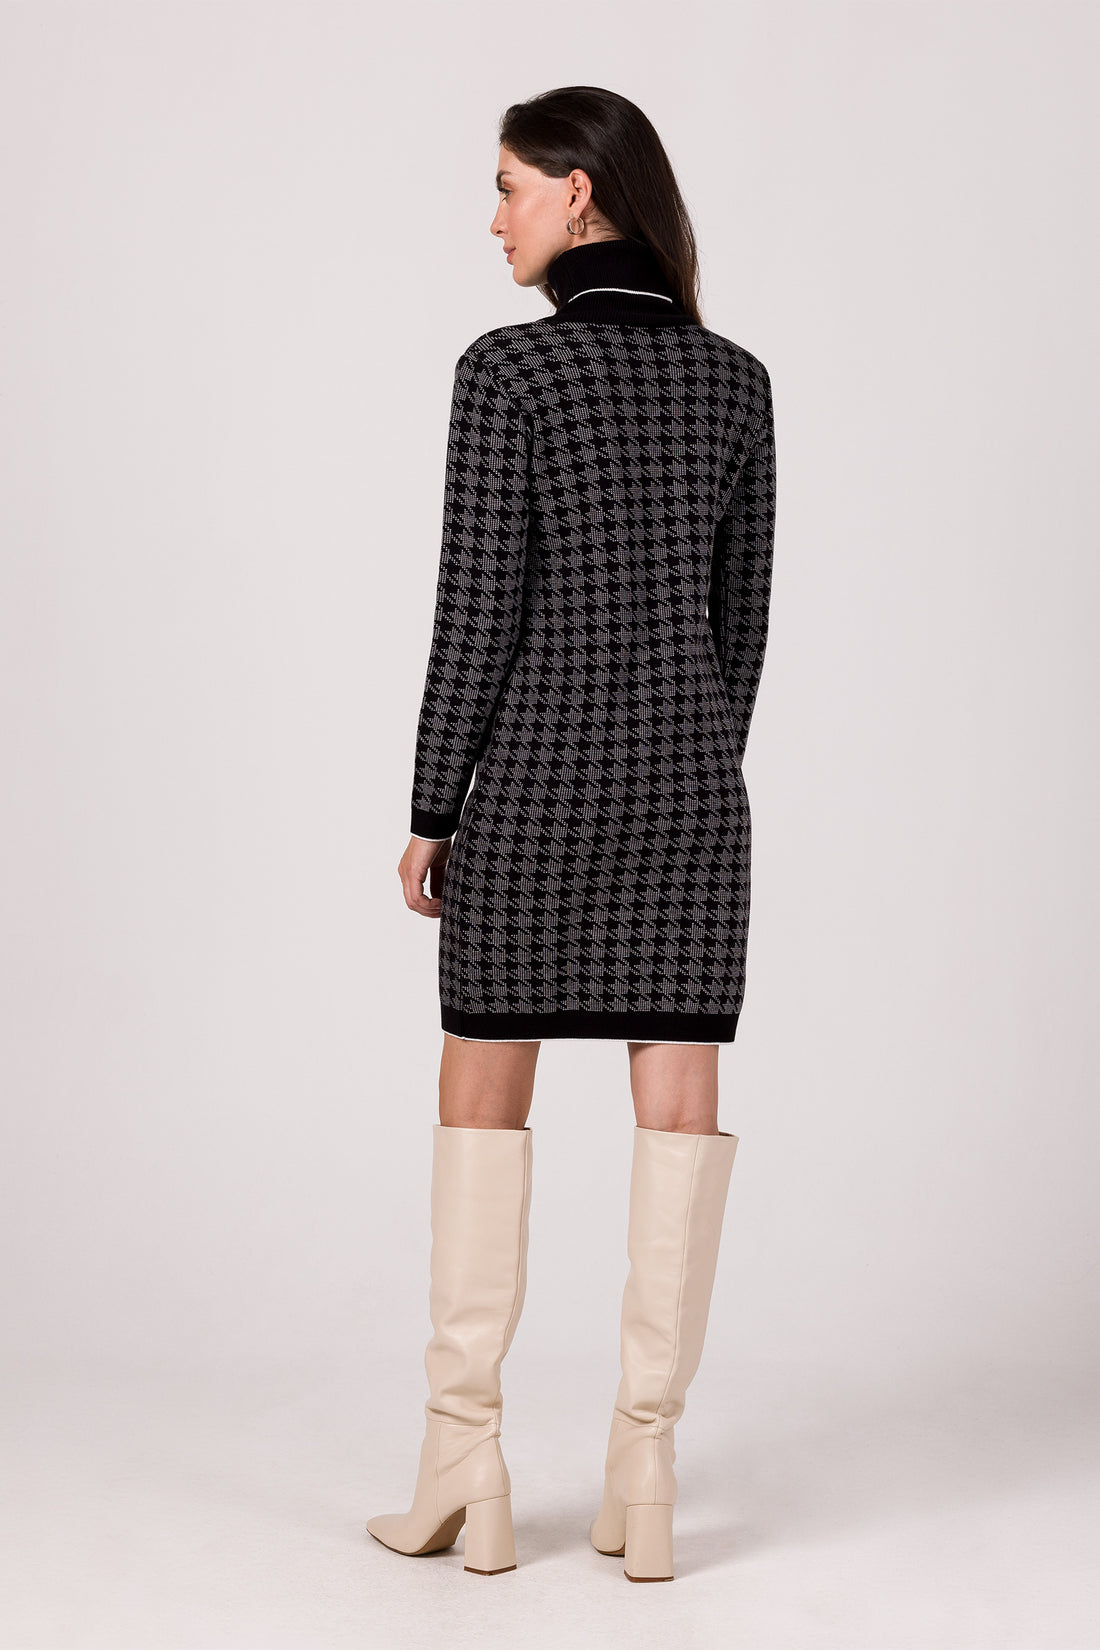 Houndstooth Plaid Knitted Sweater Dress | Strictly In | Embrace the AW season in style with our knitted sweater dress. Perfect for the office, its houndstooth pattern brings sophistication to your winter wardrobe. Pair with boots for a polished look.